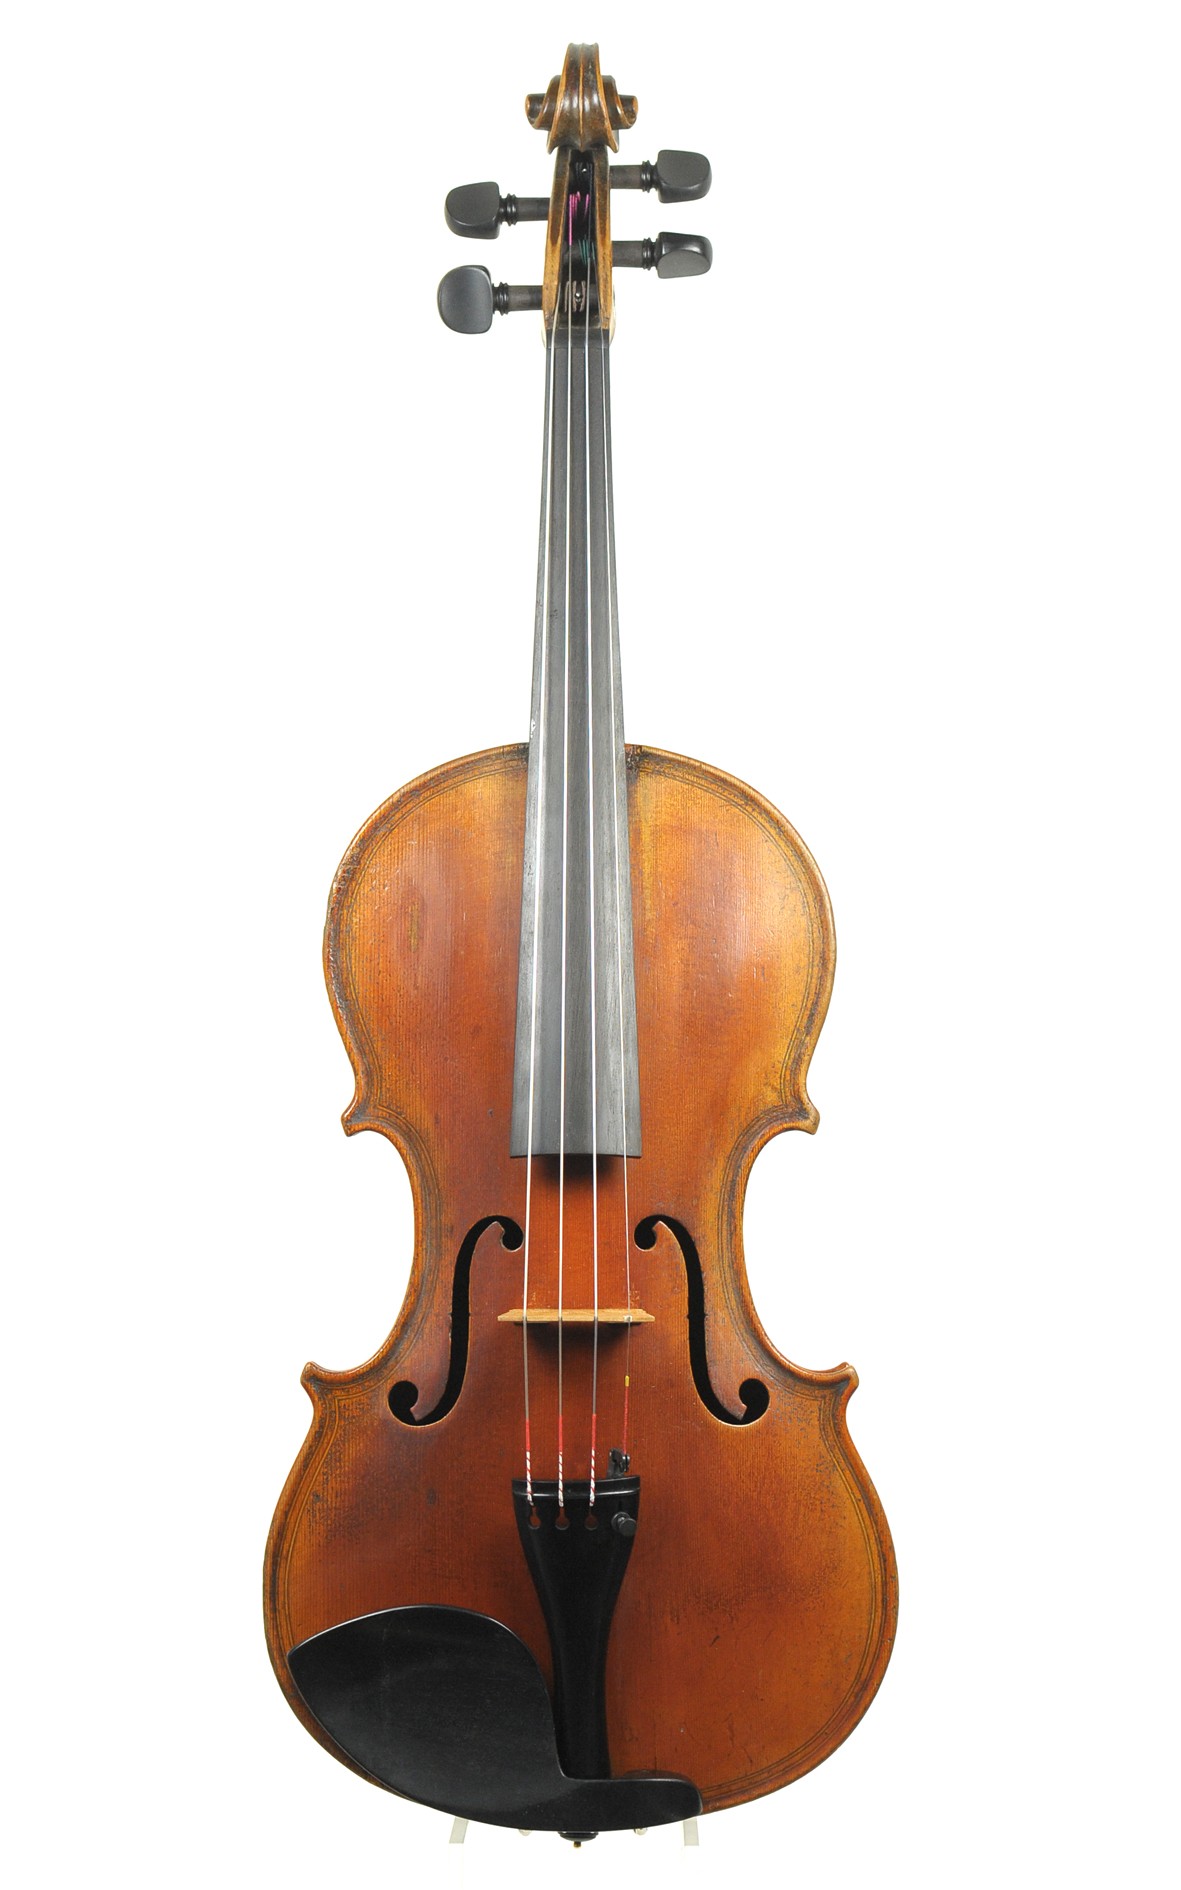 Justin Maucotel Mirecourt, French violin - table